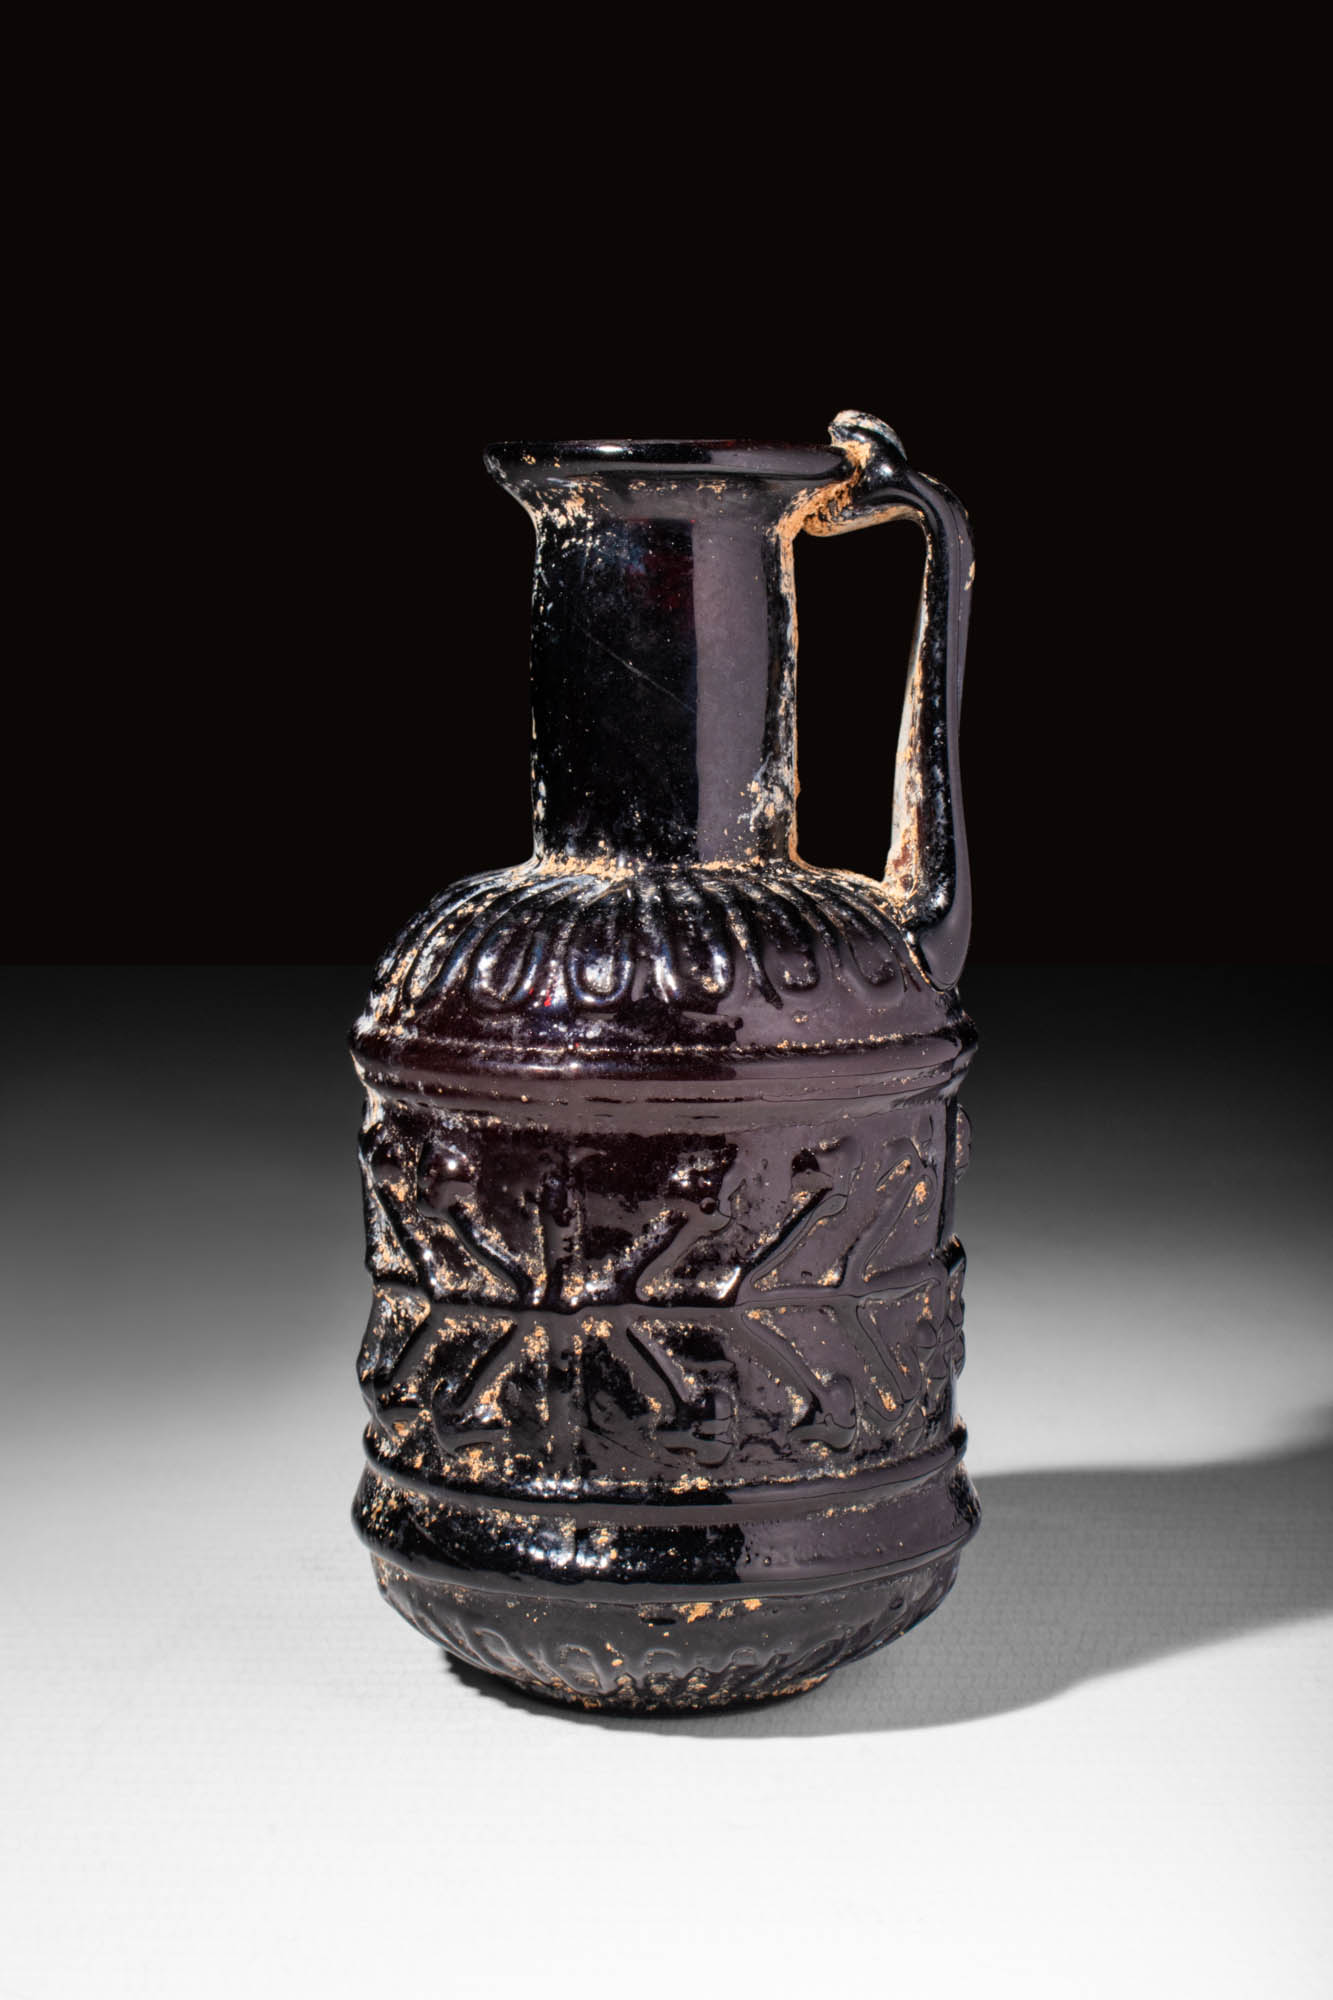 LATE ROMAN PURPLE GLASS BOTTLE DECORATED WITH MOULDED GEOMETRIC MOTIF - Image 3 of 5